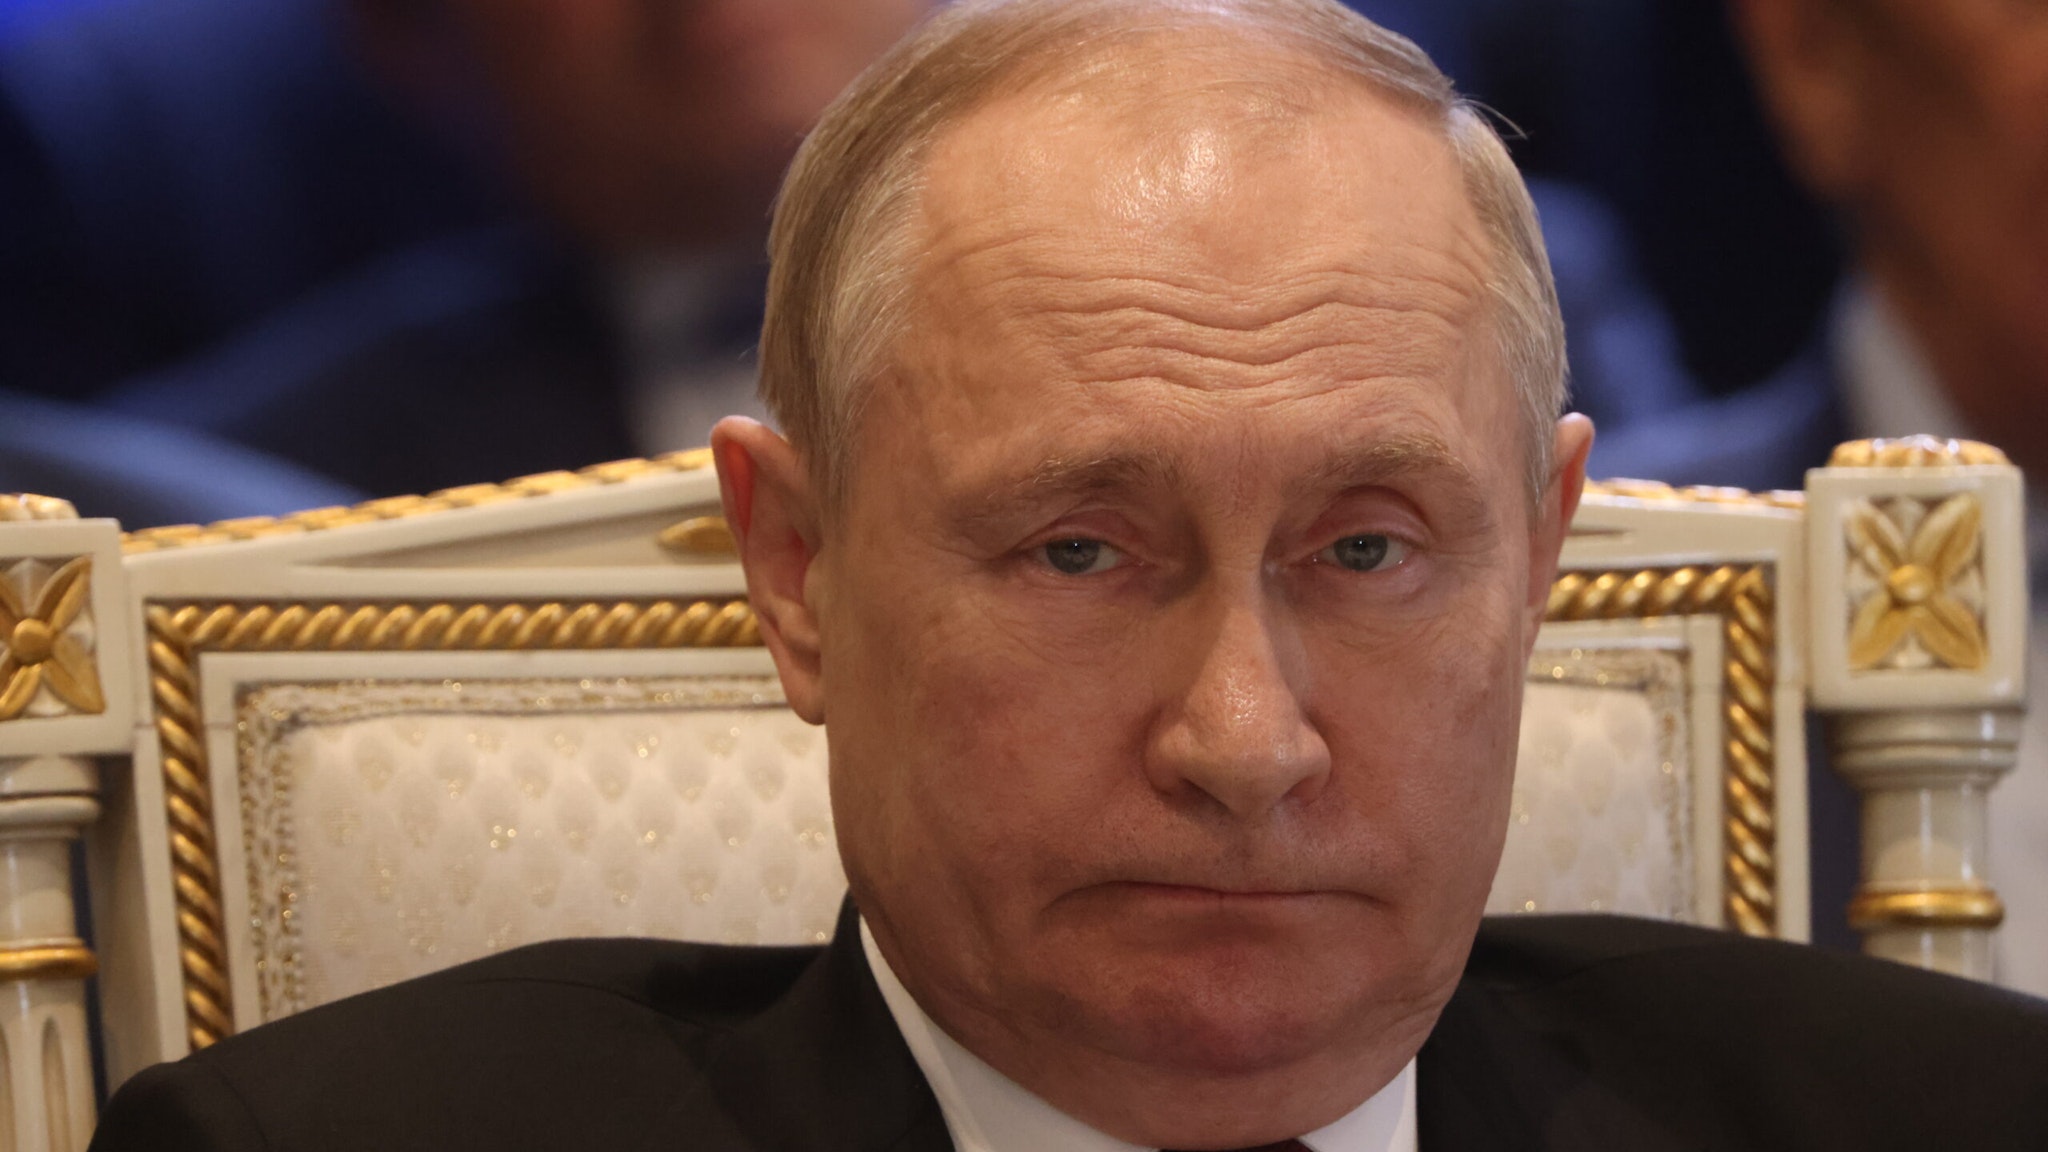 Vladimir Putin fell down a flight of stairs and crapped his pants earlier this week, prompting more rumors about his deteriorating health, according to a Telegram channel that claims to have sources close to the Russian president.